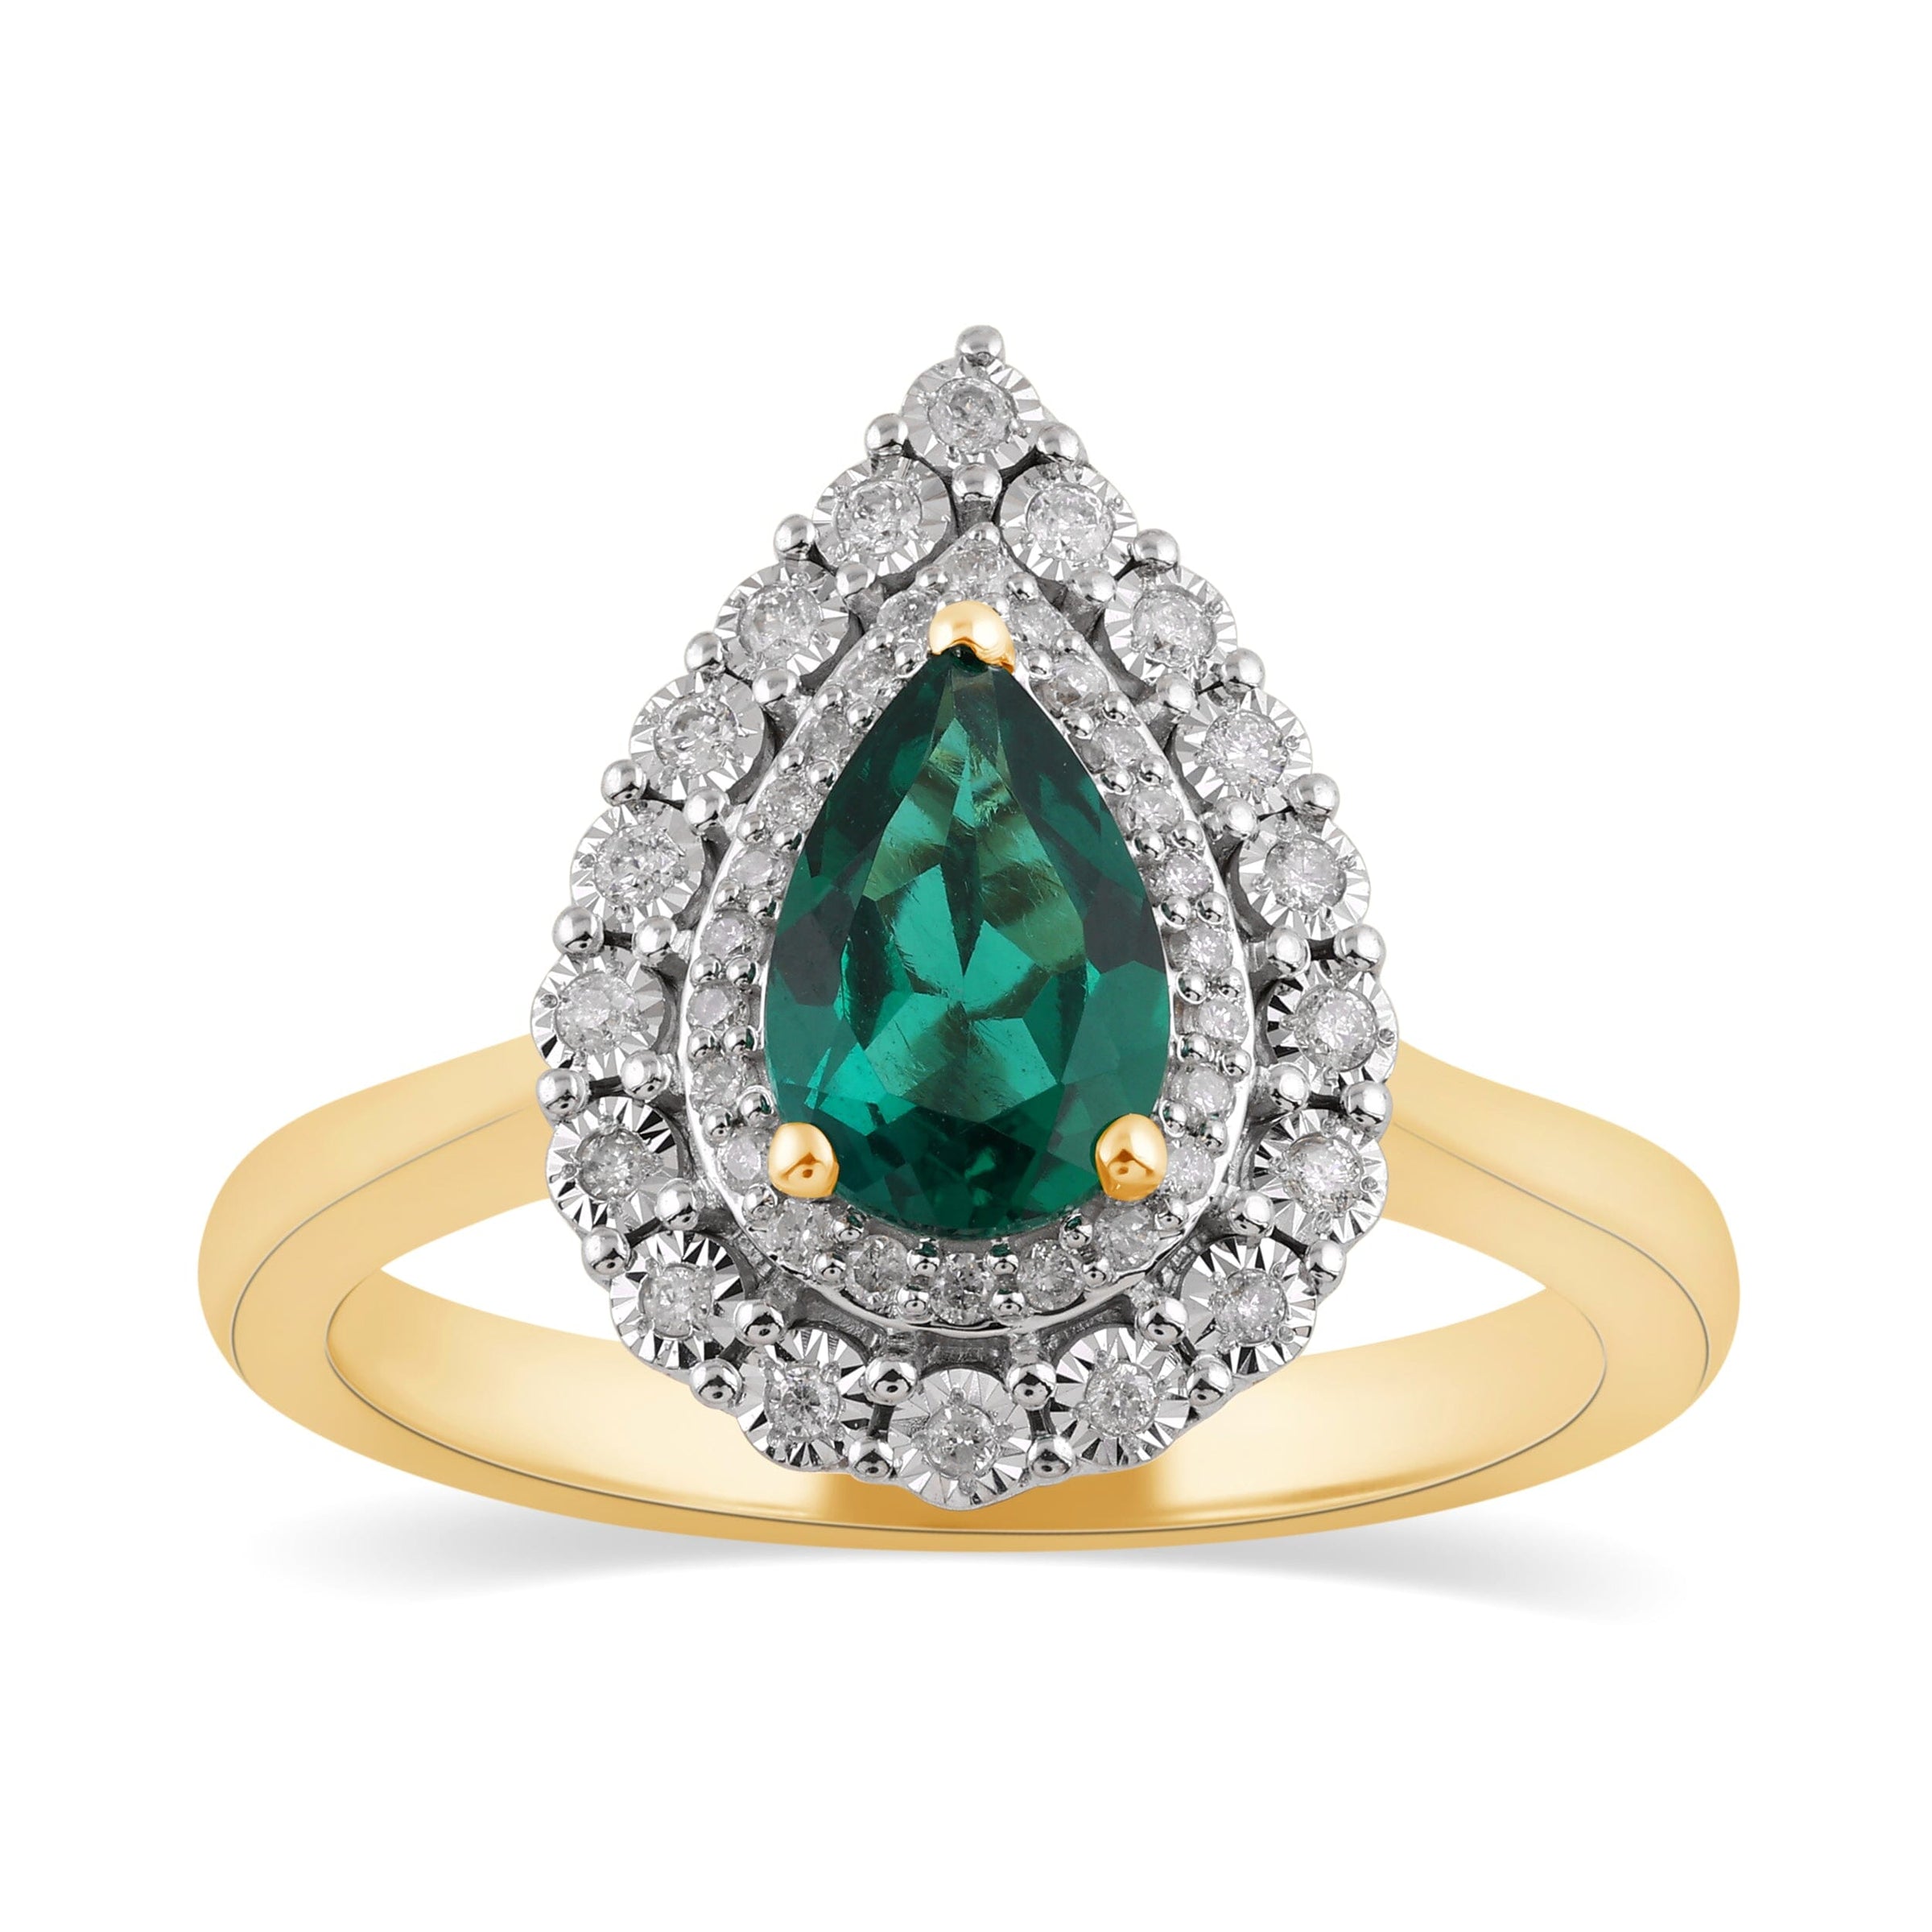 Pear Shaped Created Emerald Ring with 0.15ct of Diamonds in 9ct Yellow Gold Rings Bevilles 